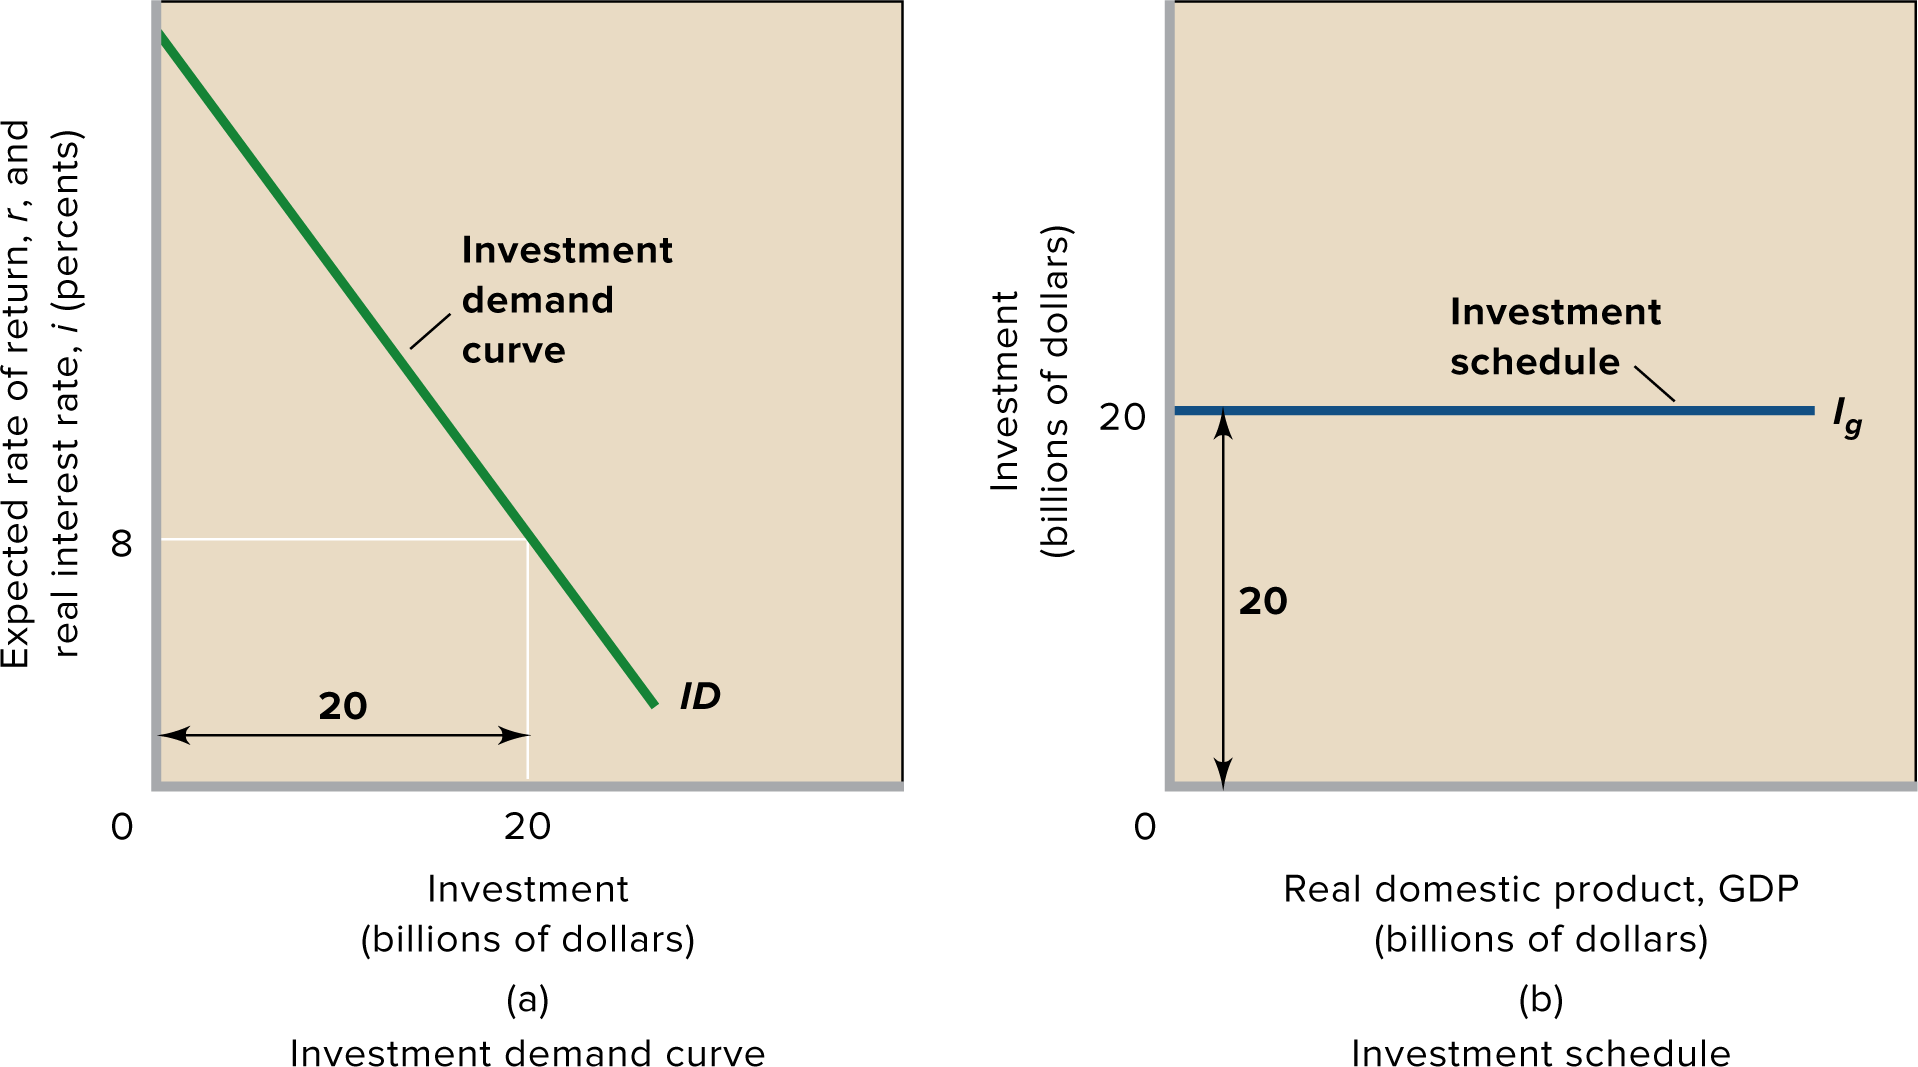 ID curve vs. investment schedule